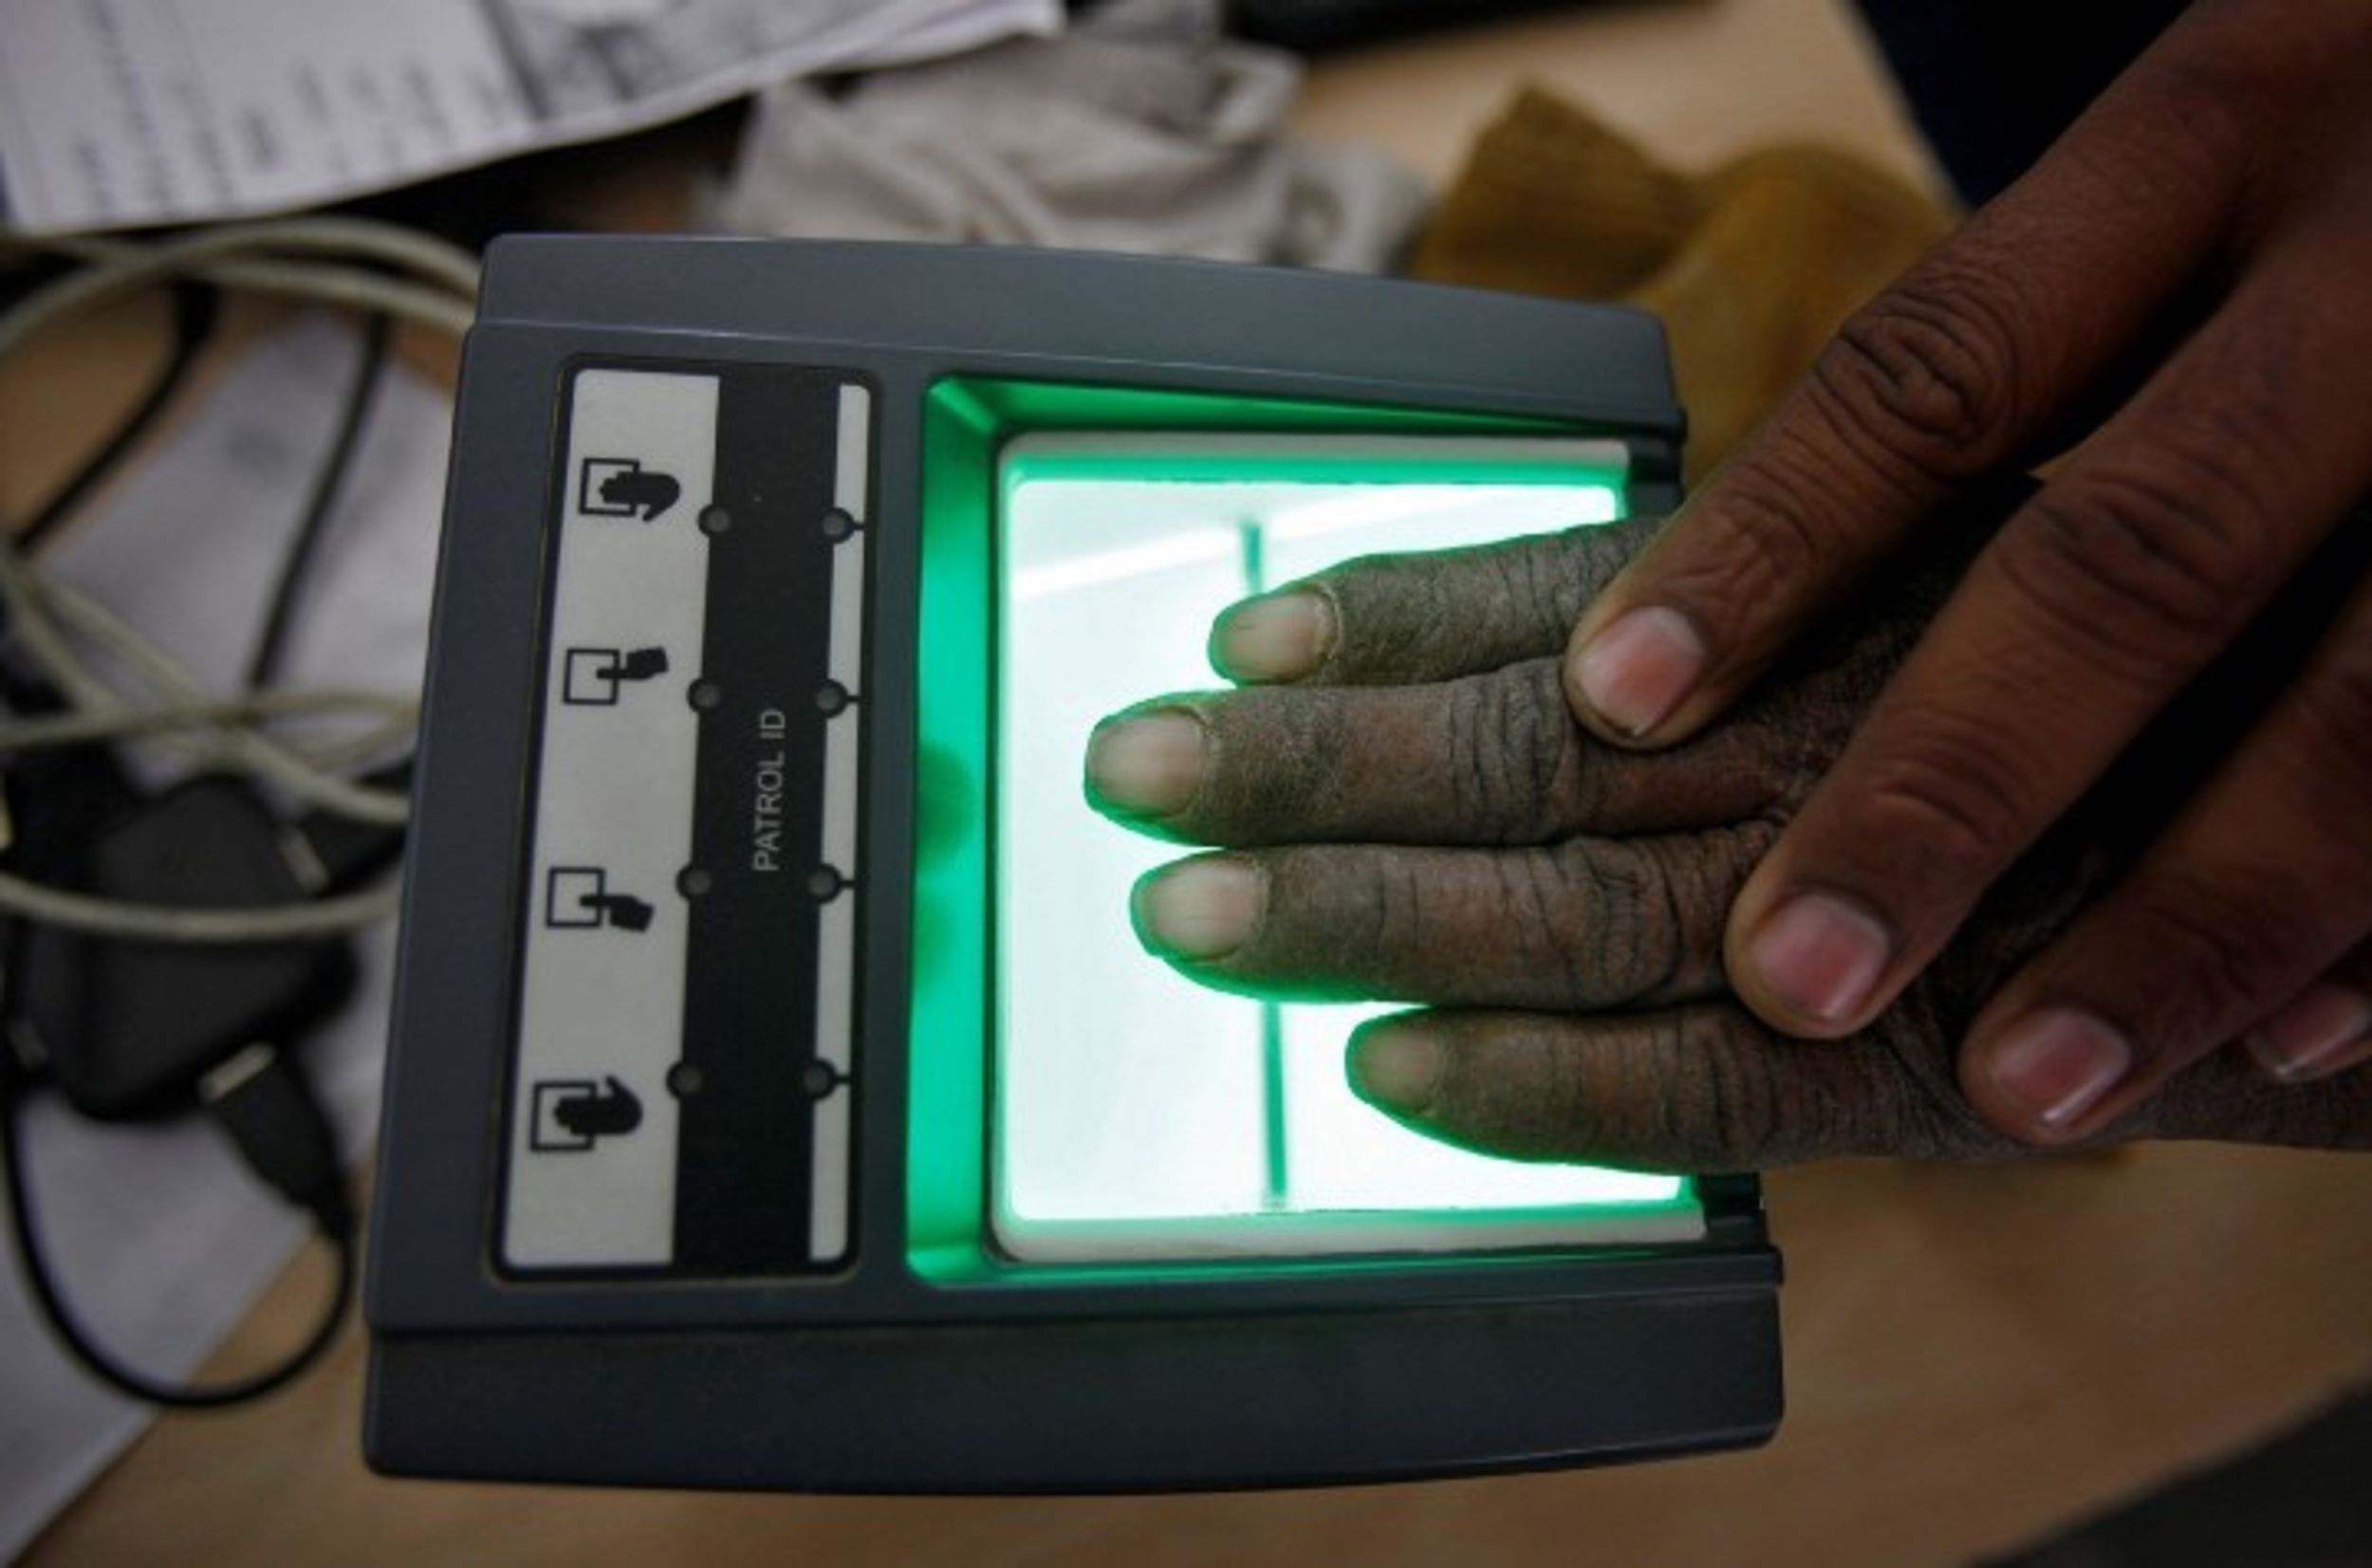 The Government Has Biometric Data on a Billion People